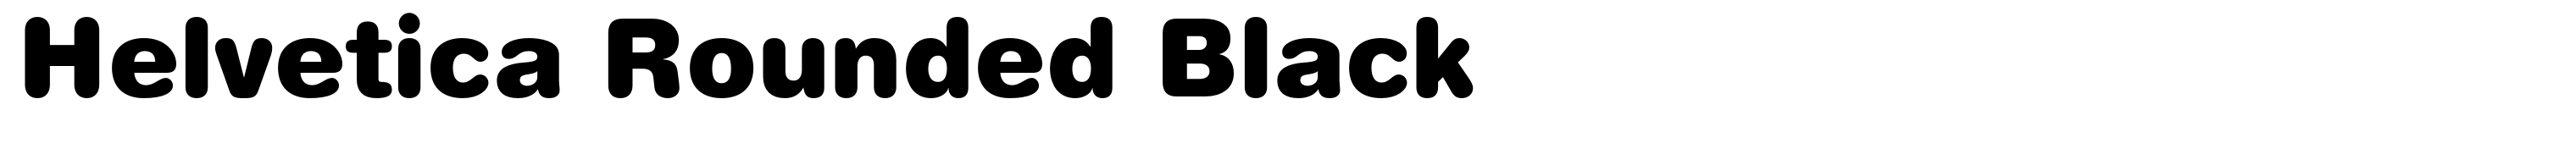 Helvetica Rounded Black